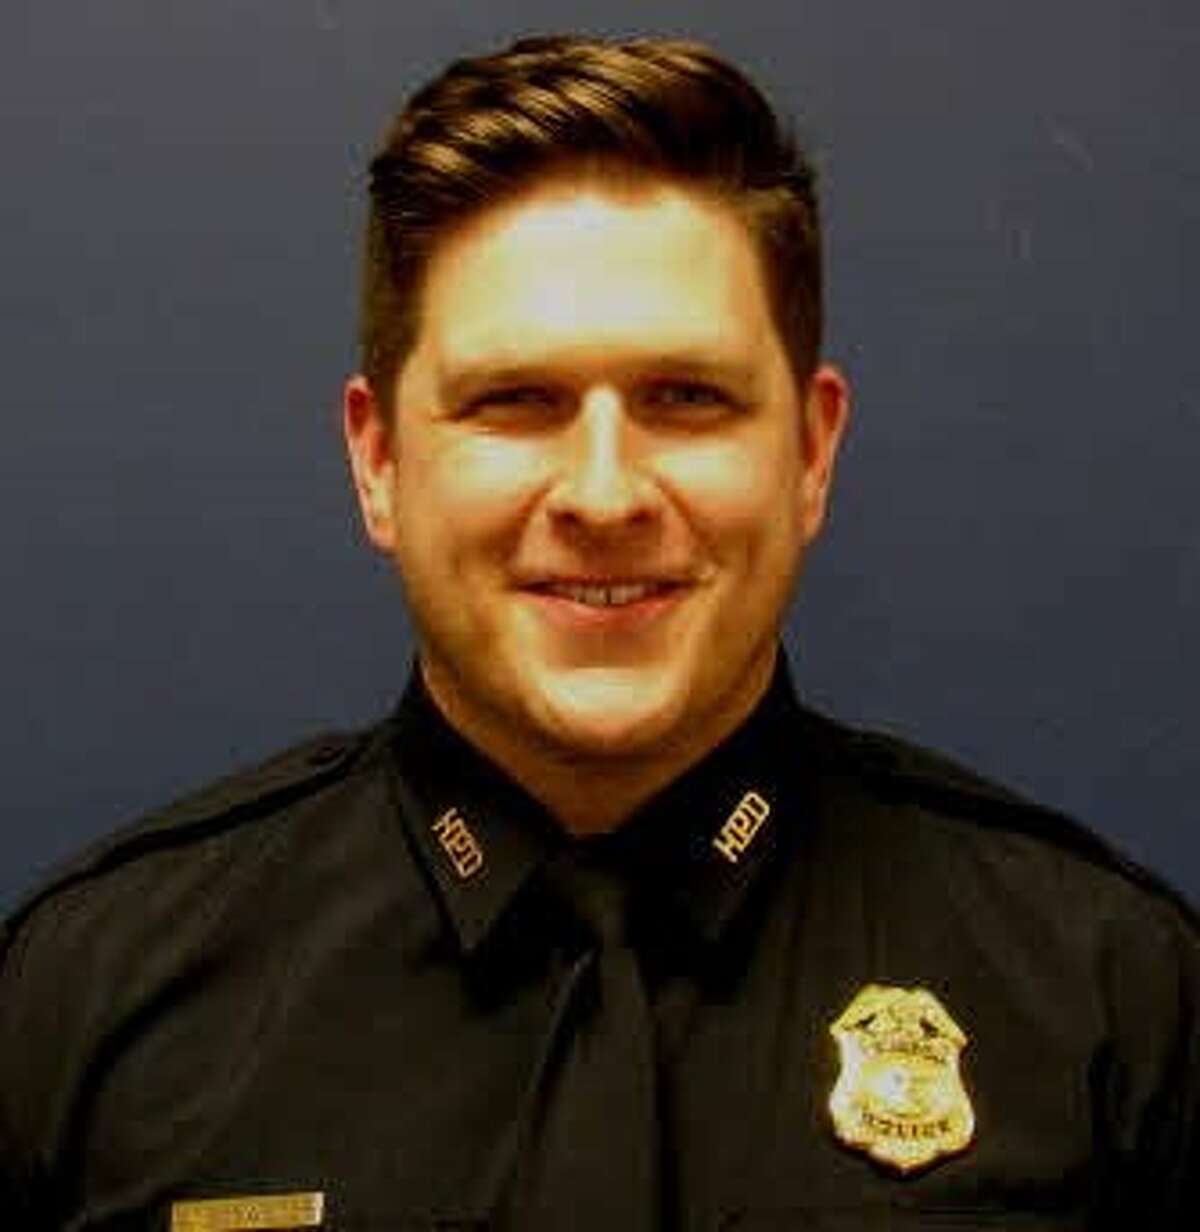 Sergeant Christopher Brewster, 32. Brewster was shot and killed during a domestic disturbance near Magnolia Park in east Houston Saturday, Dec. 7, 2019.